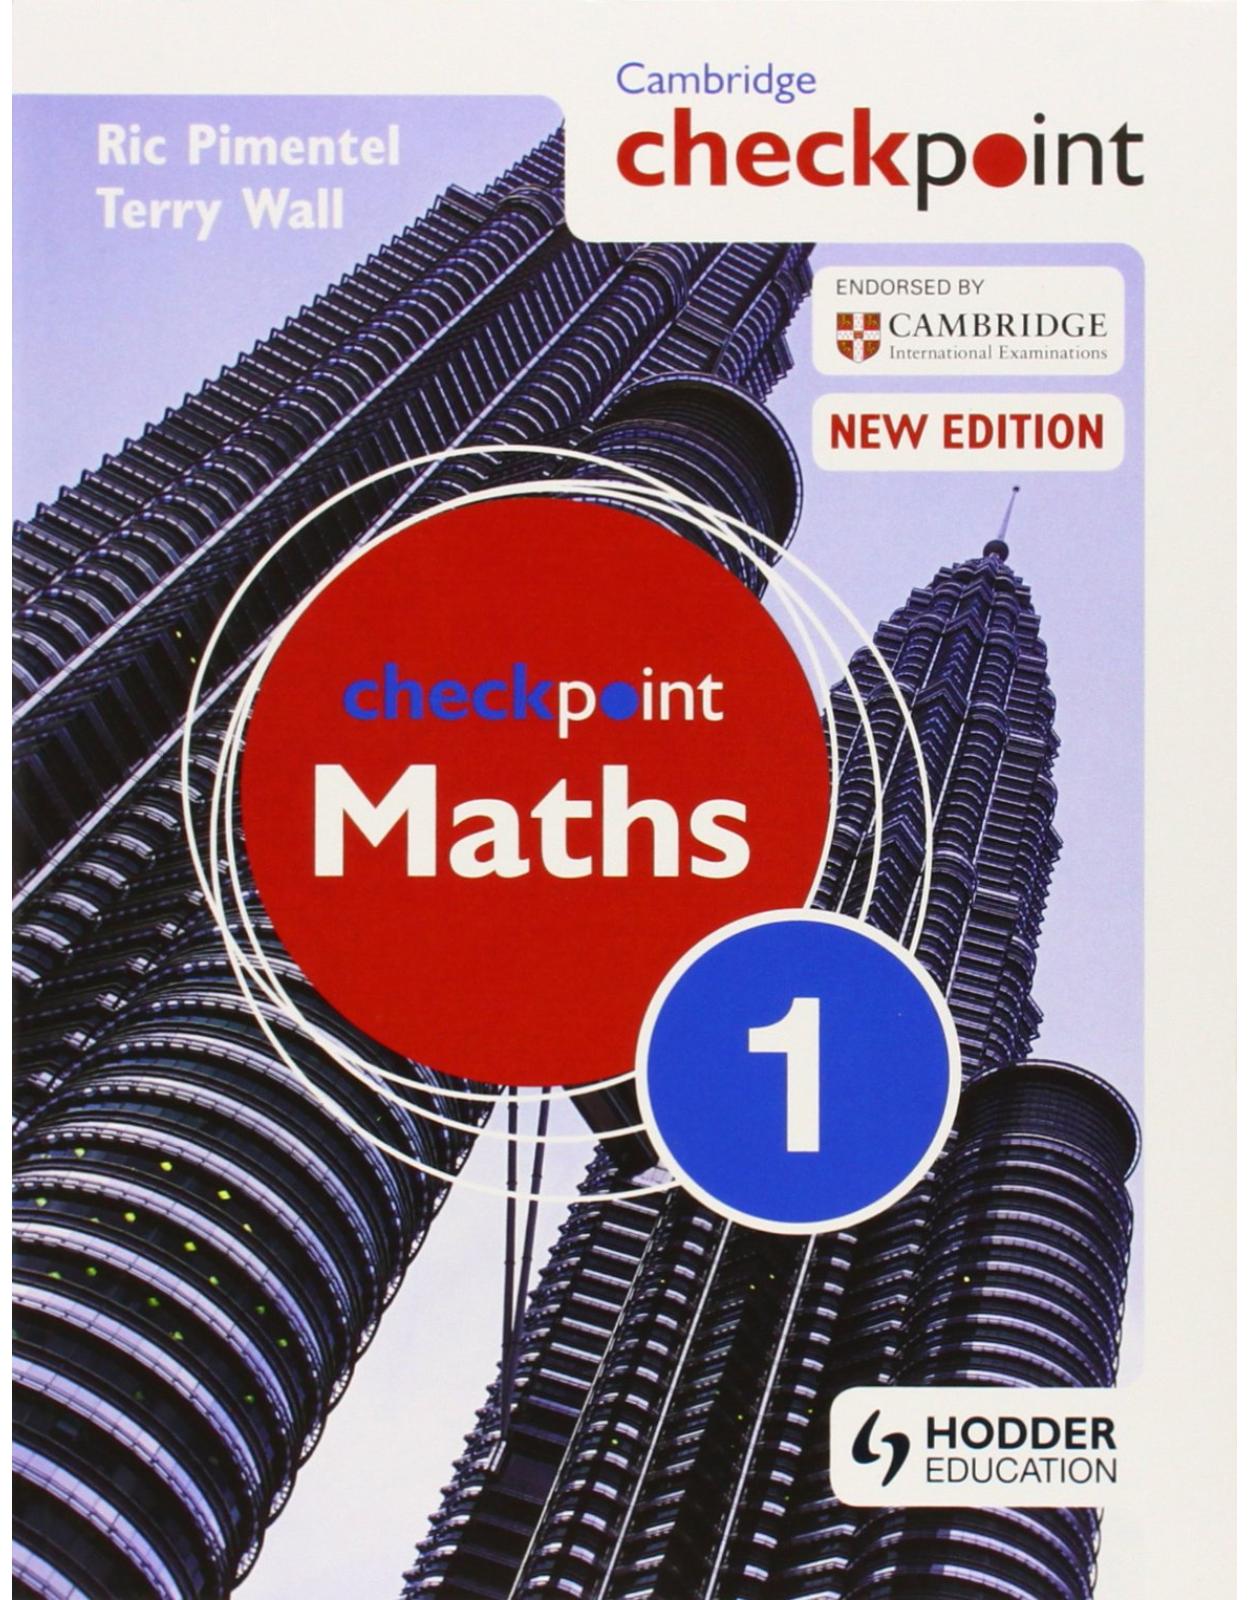 Cambridge Checkpoint Maths Student's Book 1